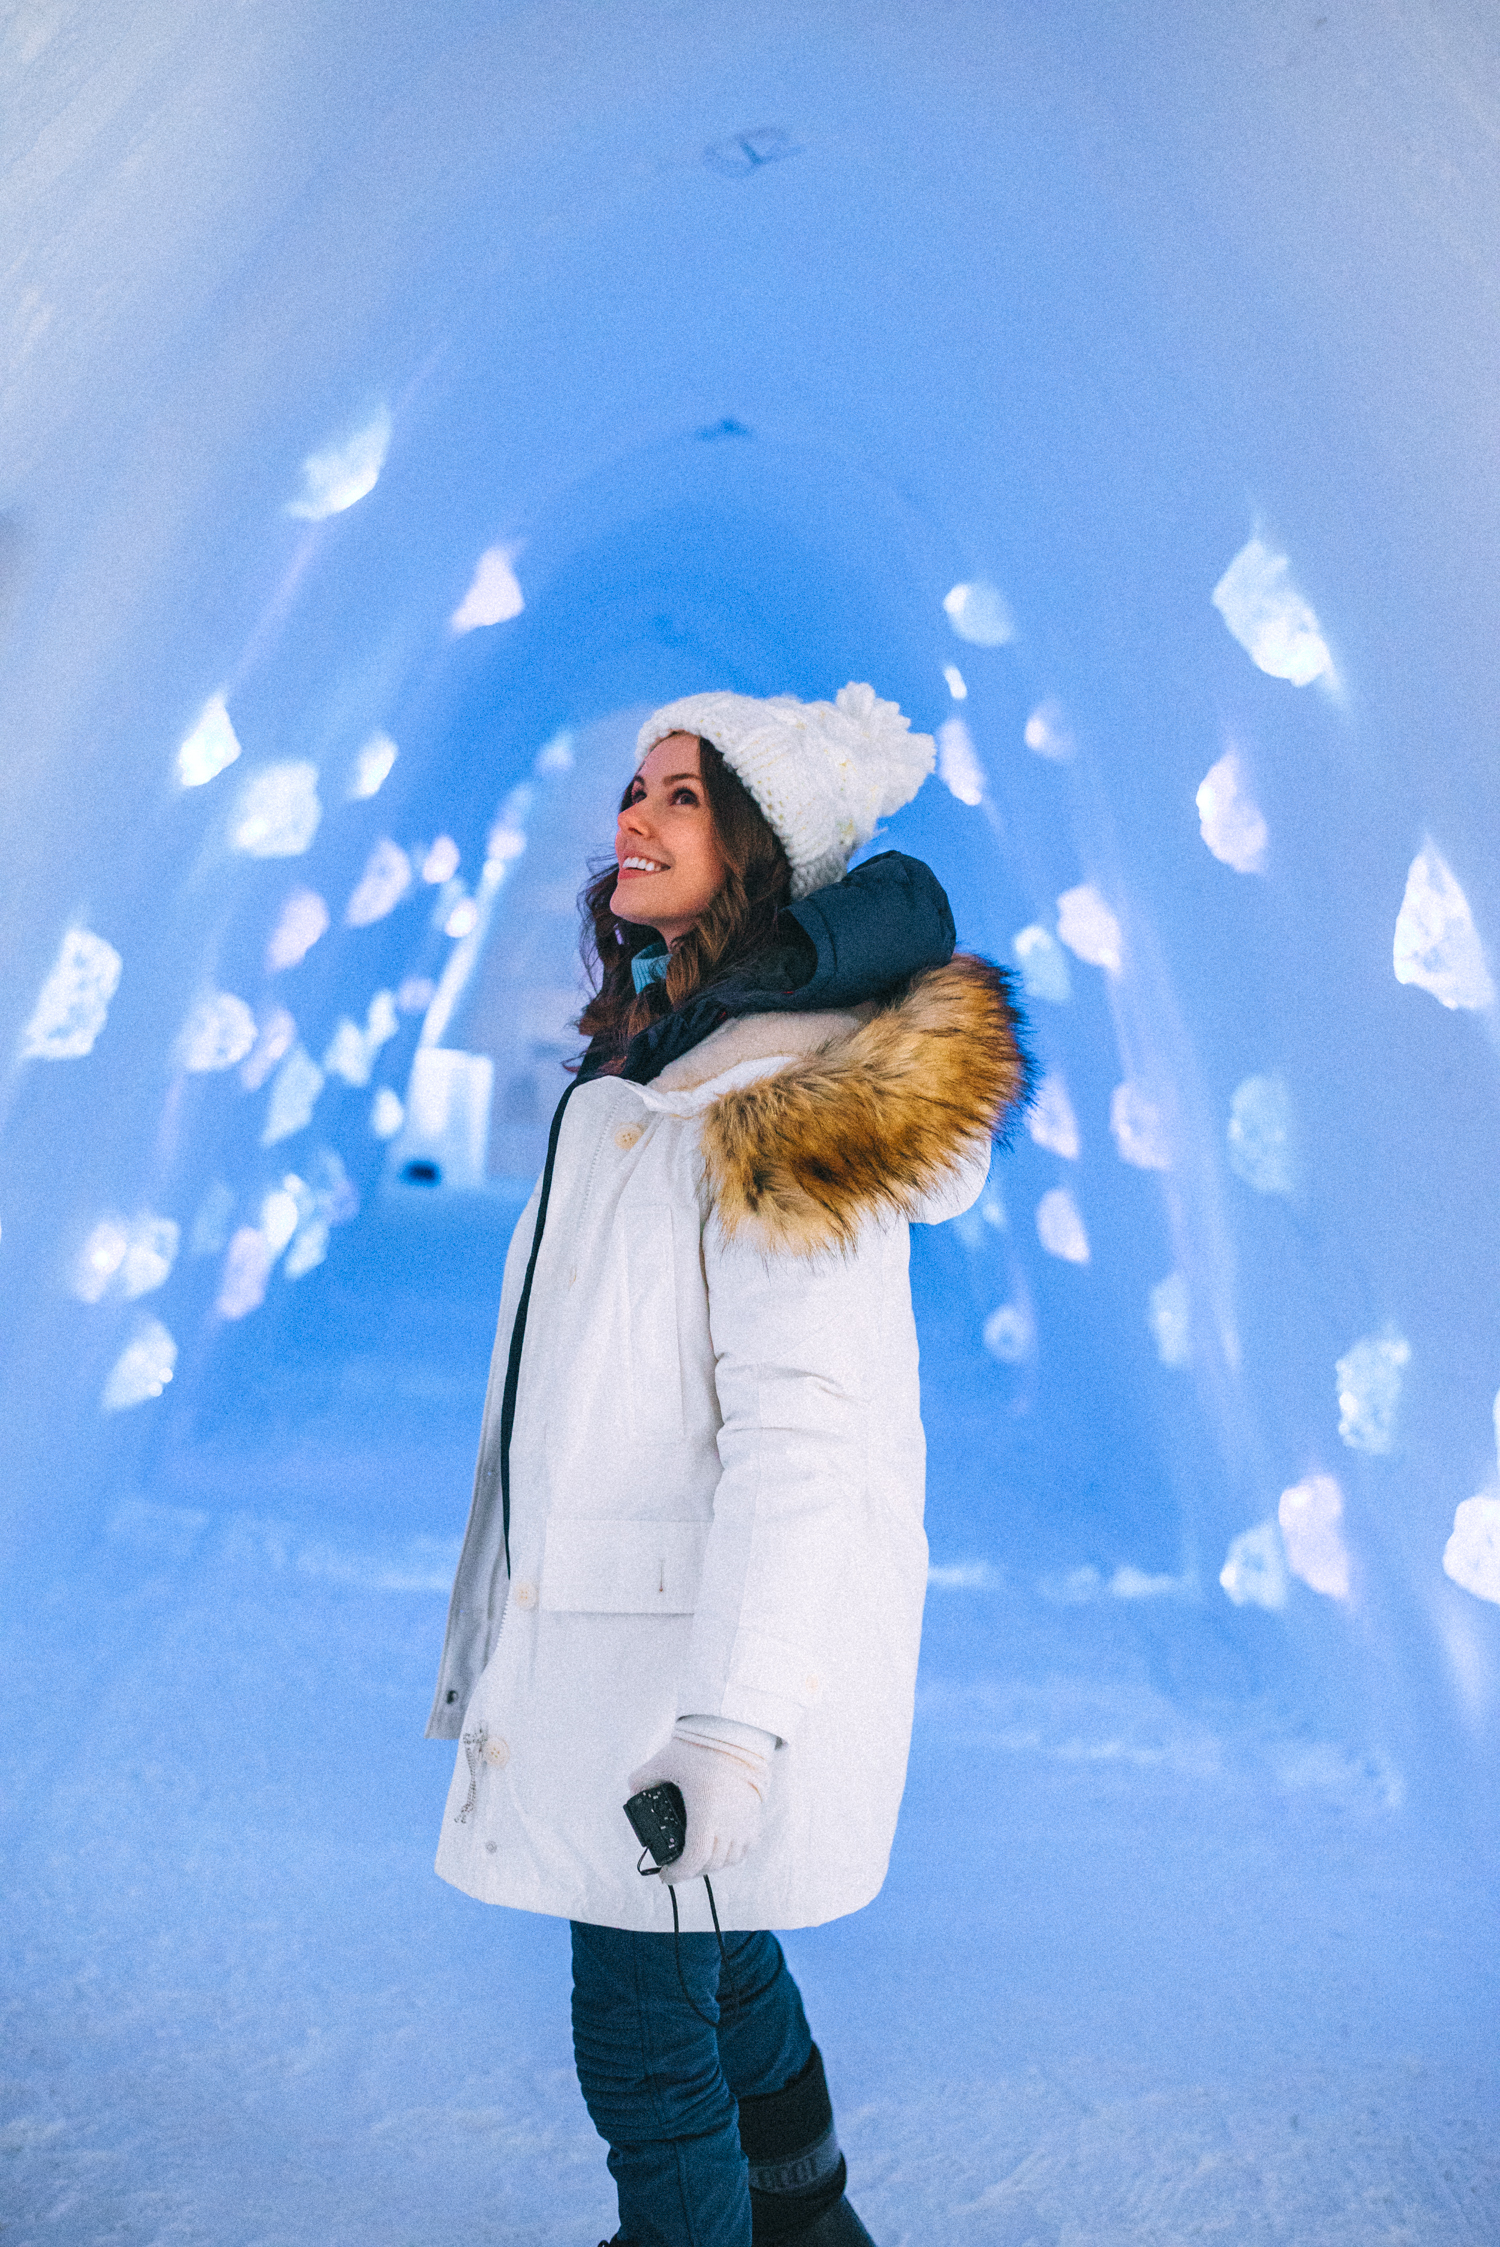 Alyssa Campanella of The A List blog visits the Game of Thrones ice hotel in Finland wearing Perfect Moment